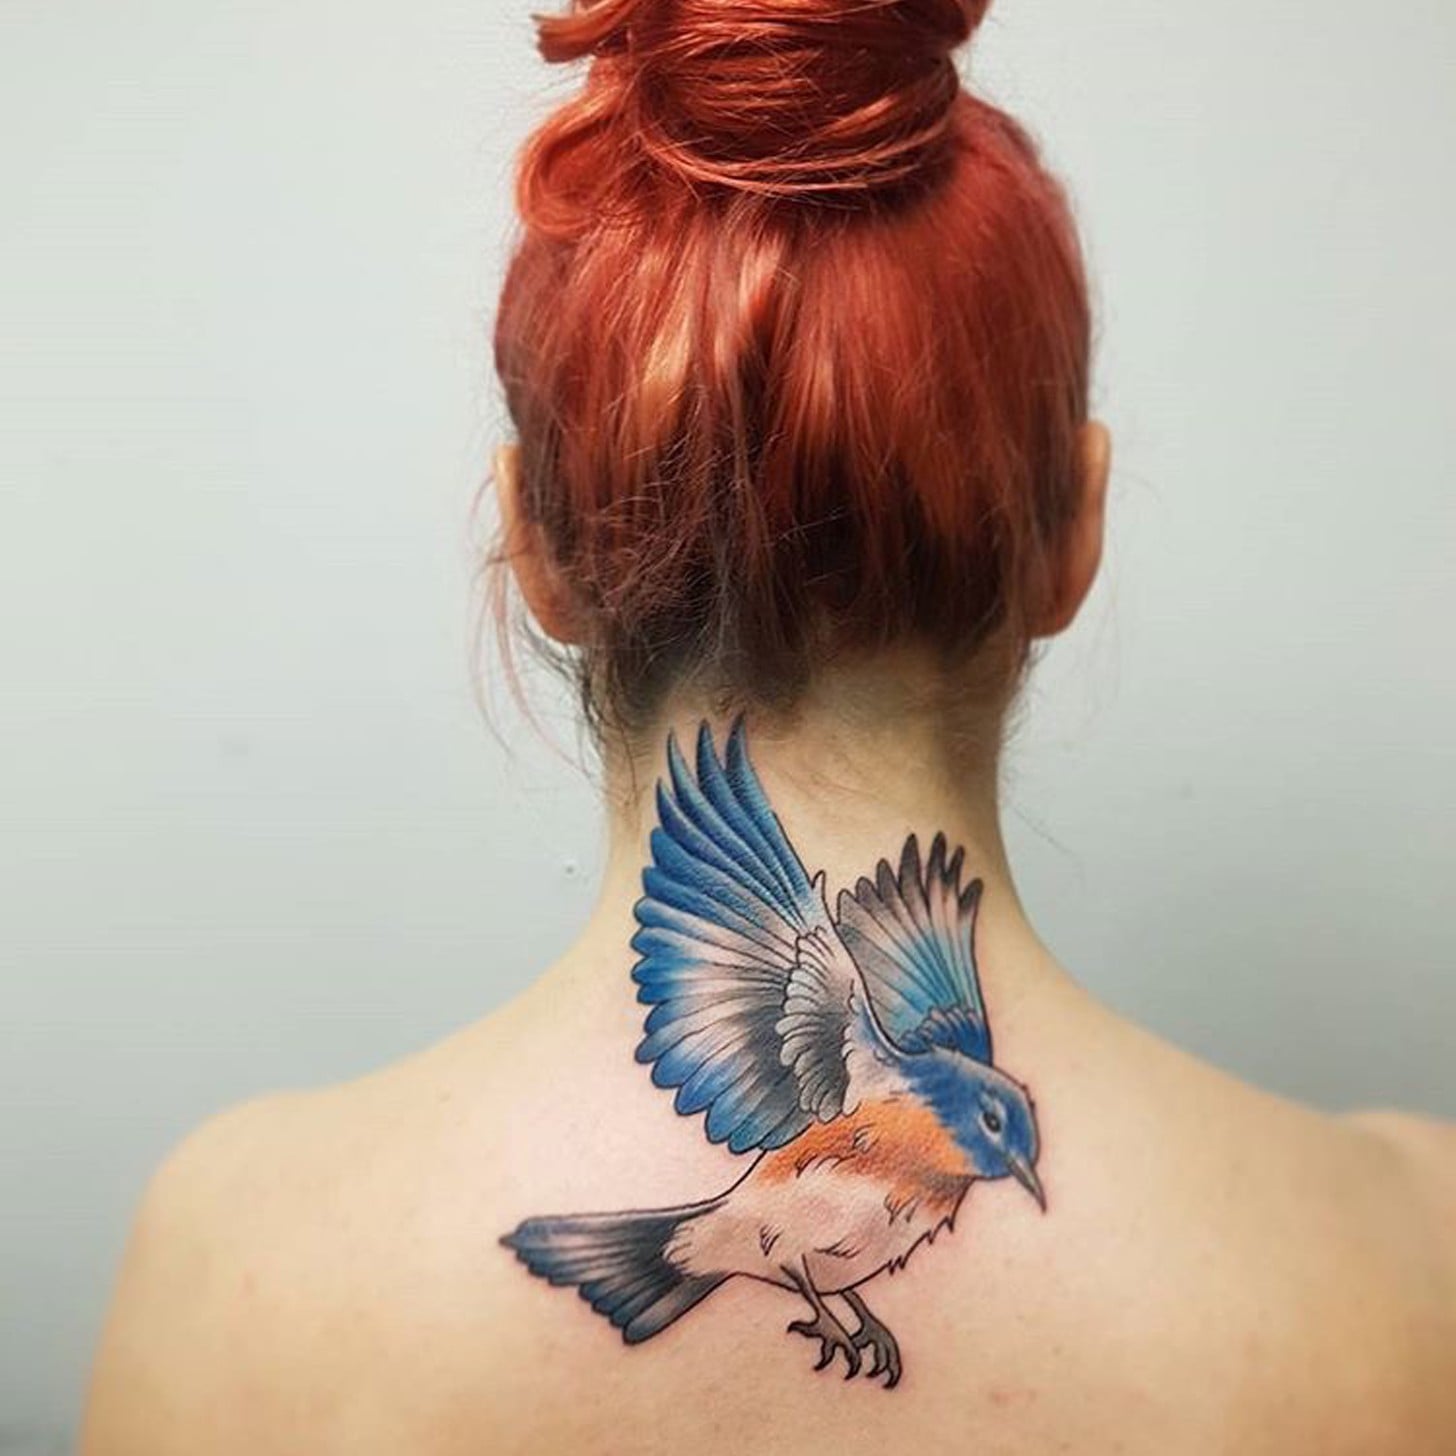 Tattoodo  Rate this tattoo from 110  Blue Jay by Janice Baobao    Facebook